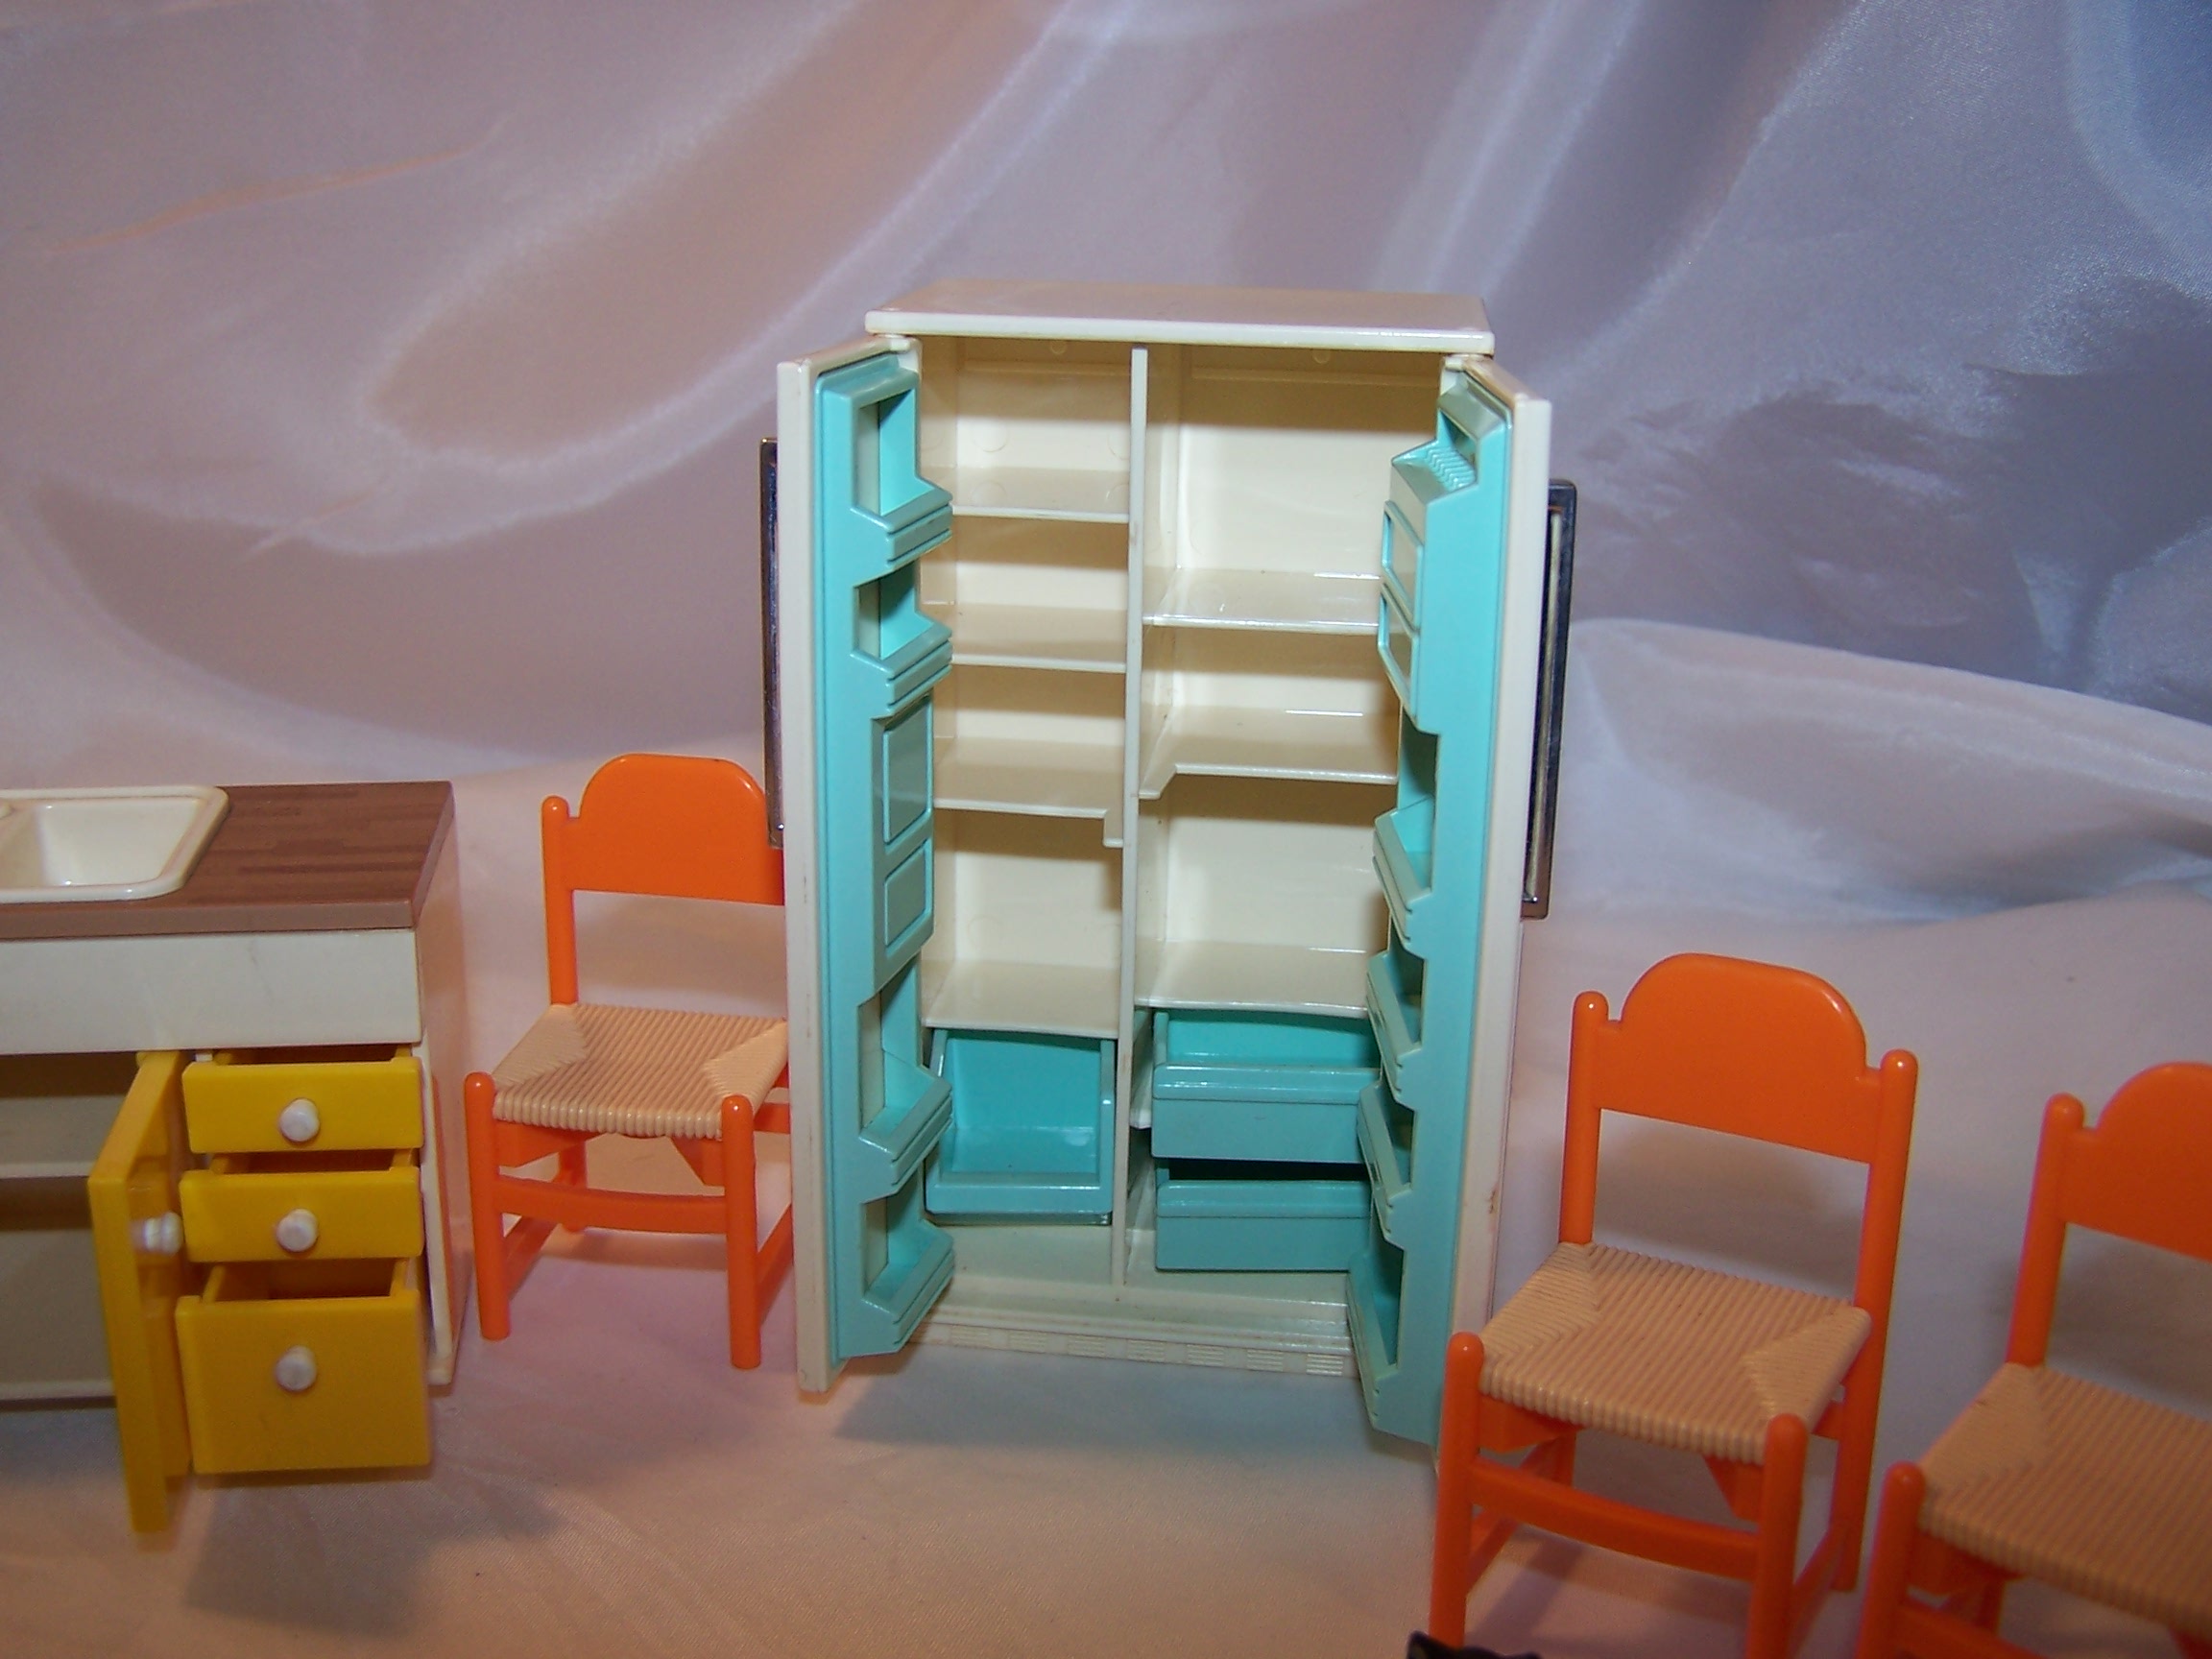 Image 38 of Dollhouse w Family, Furniture, Tomy